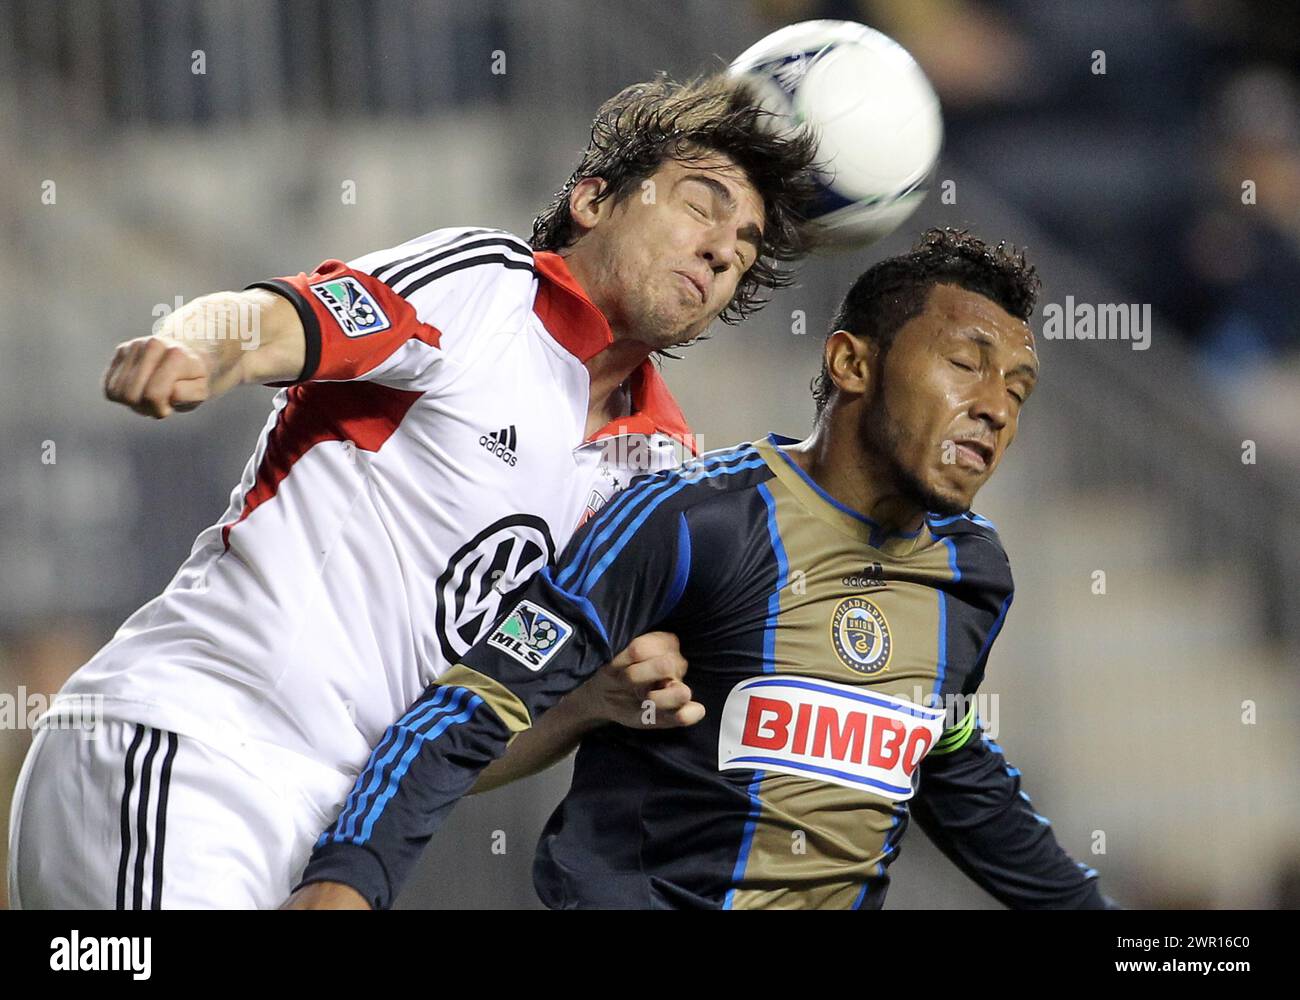 September 20 2012:  Carlos ValdŽs (2) of the Philadelphia Union is beaten to a header by Dejan Jakovic (5) of DC United during an MLS match at PPL Park, in Chester, PA. DC United won 1-0. Stock Photo